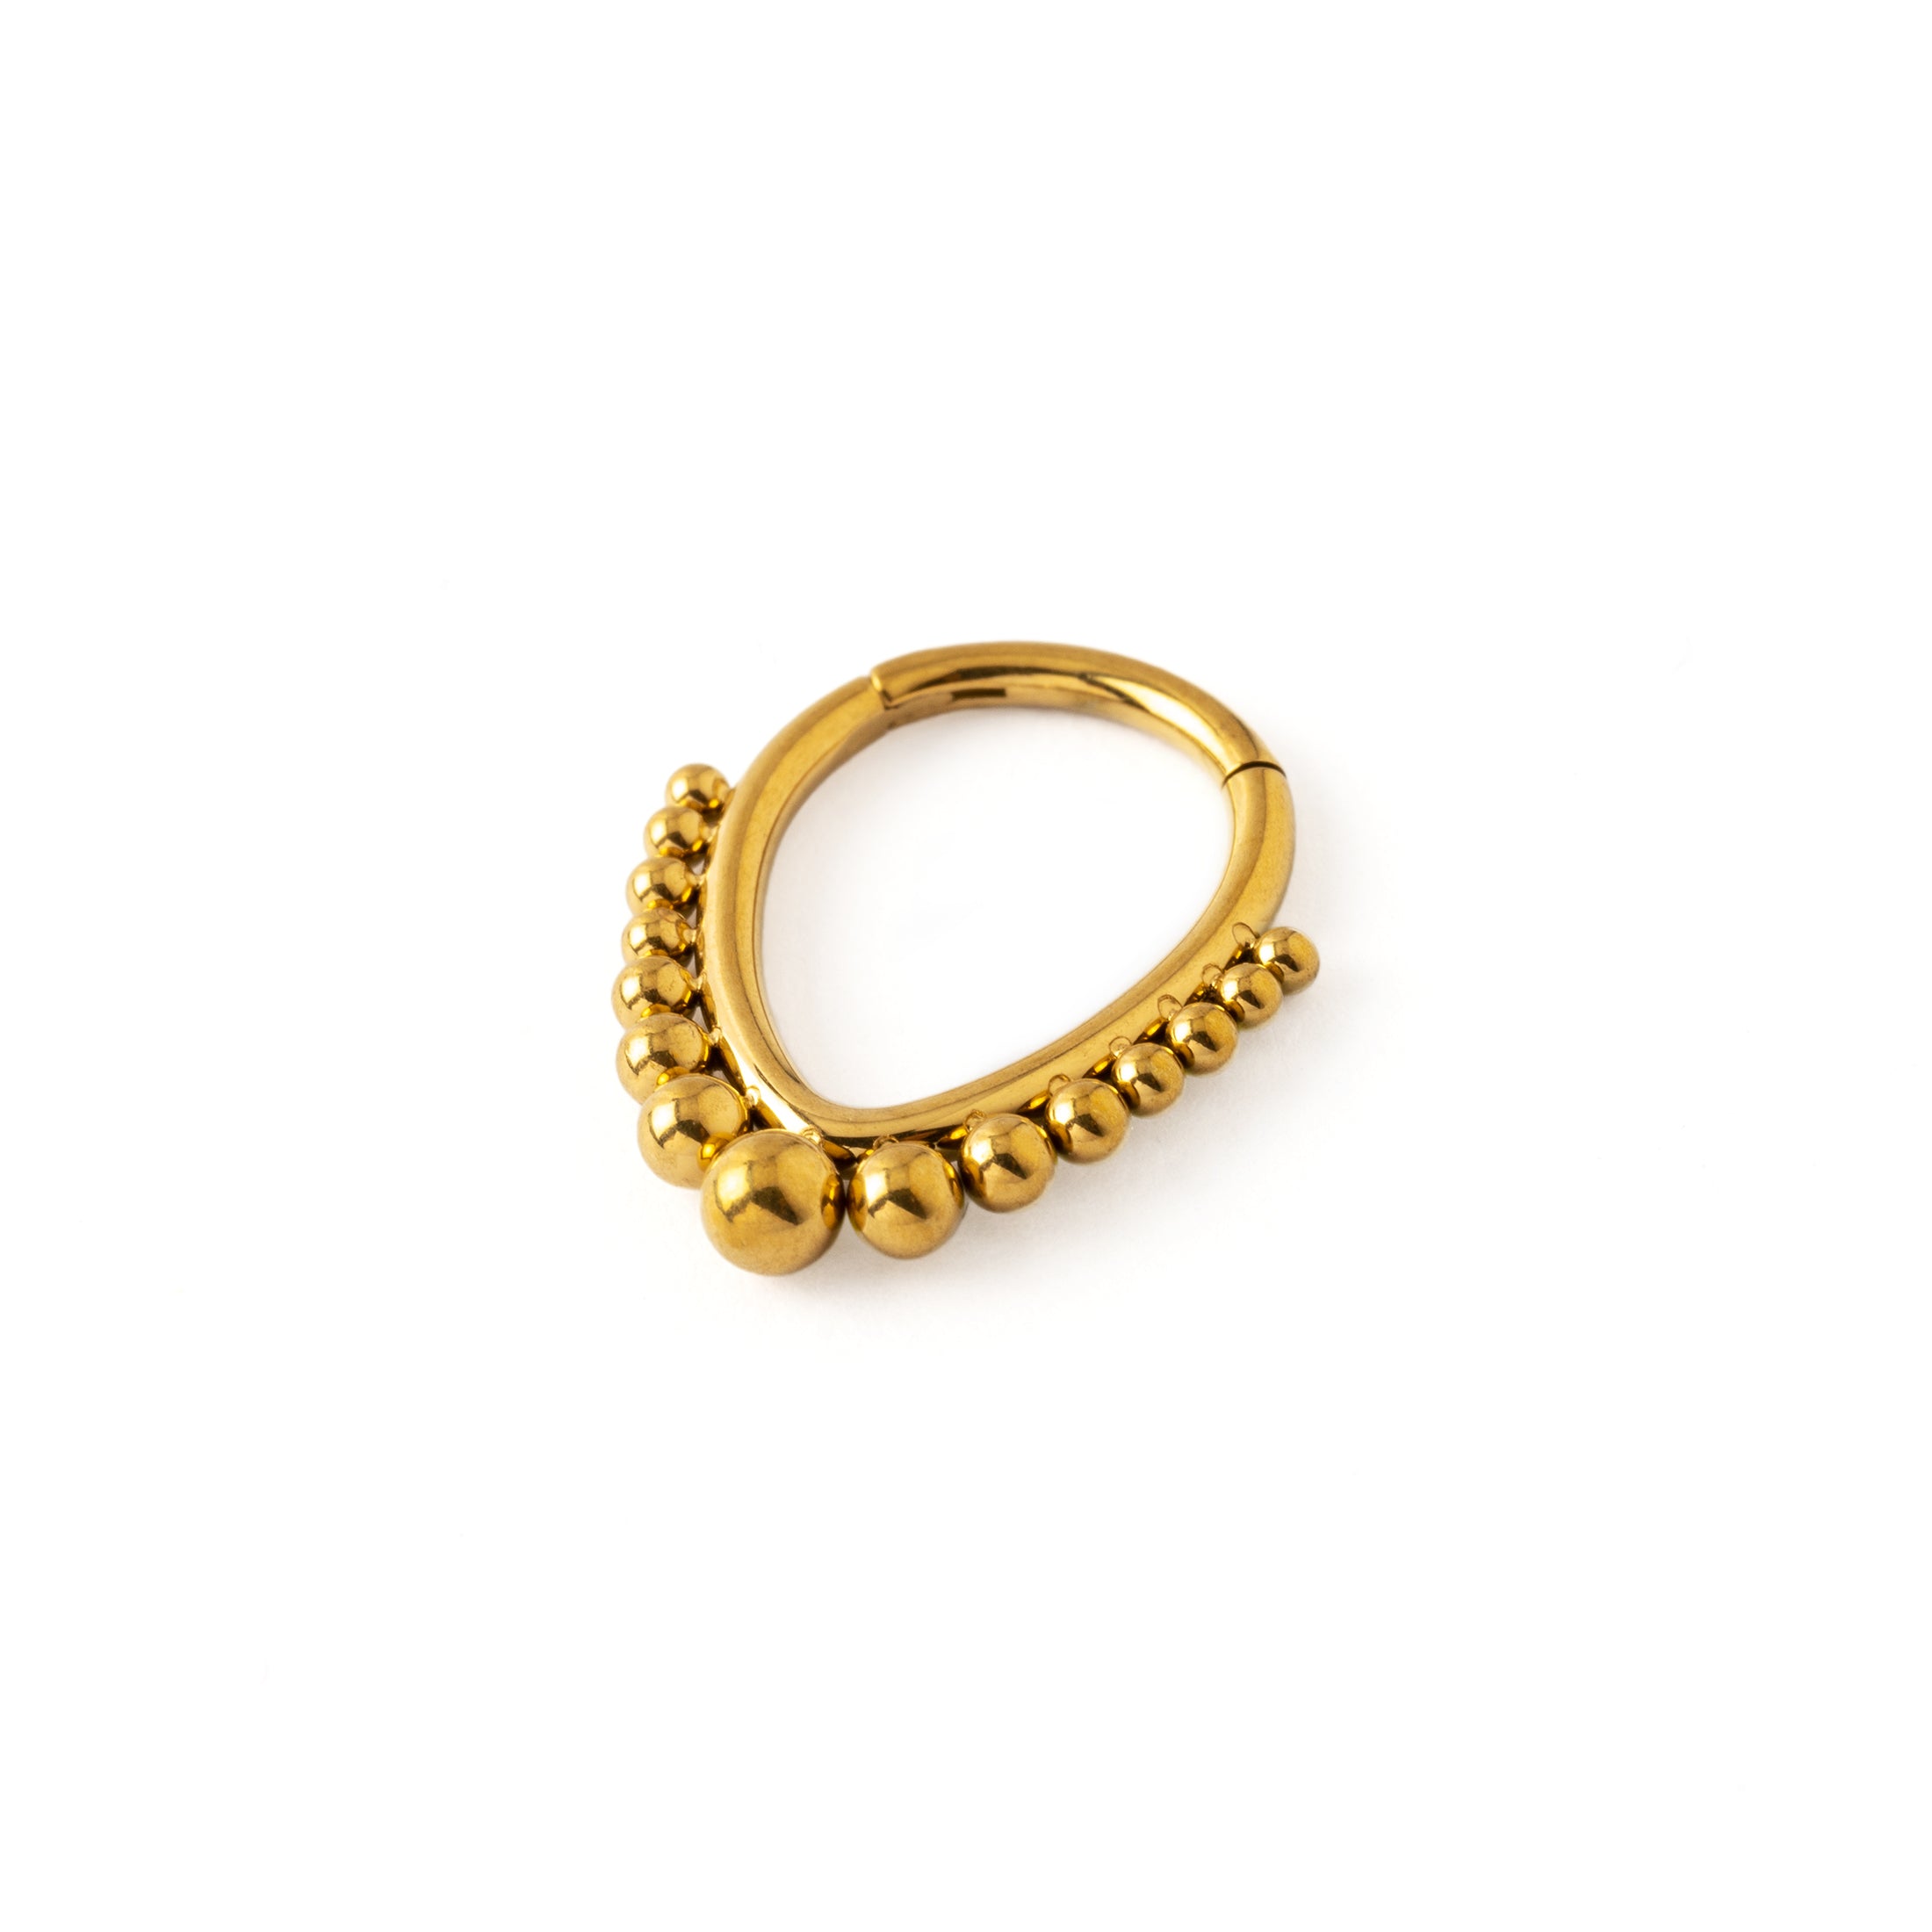 Althea Golden surgical steel Teardrop Septum Clicker ring right side view